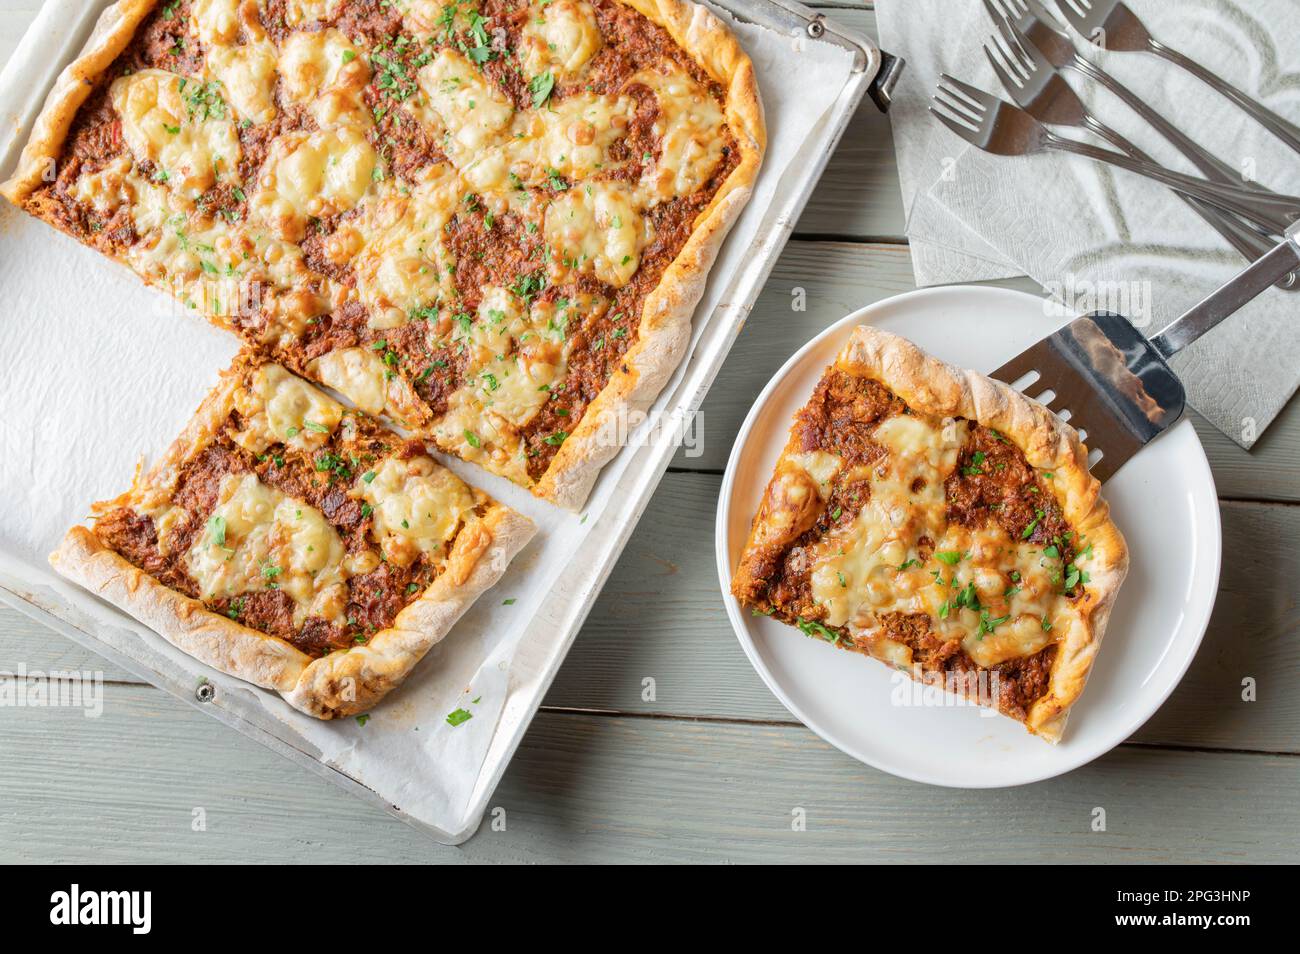 Pizza with ground beef, cheese, tomatoes, onions, bell peppers and herbs on a baking sheet and plate Stock Photo